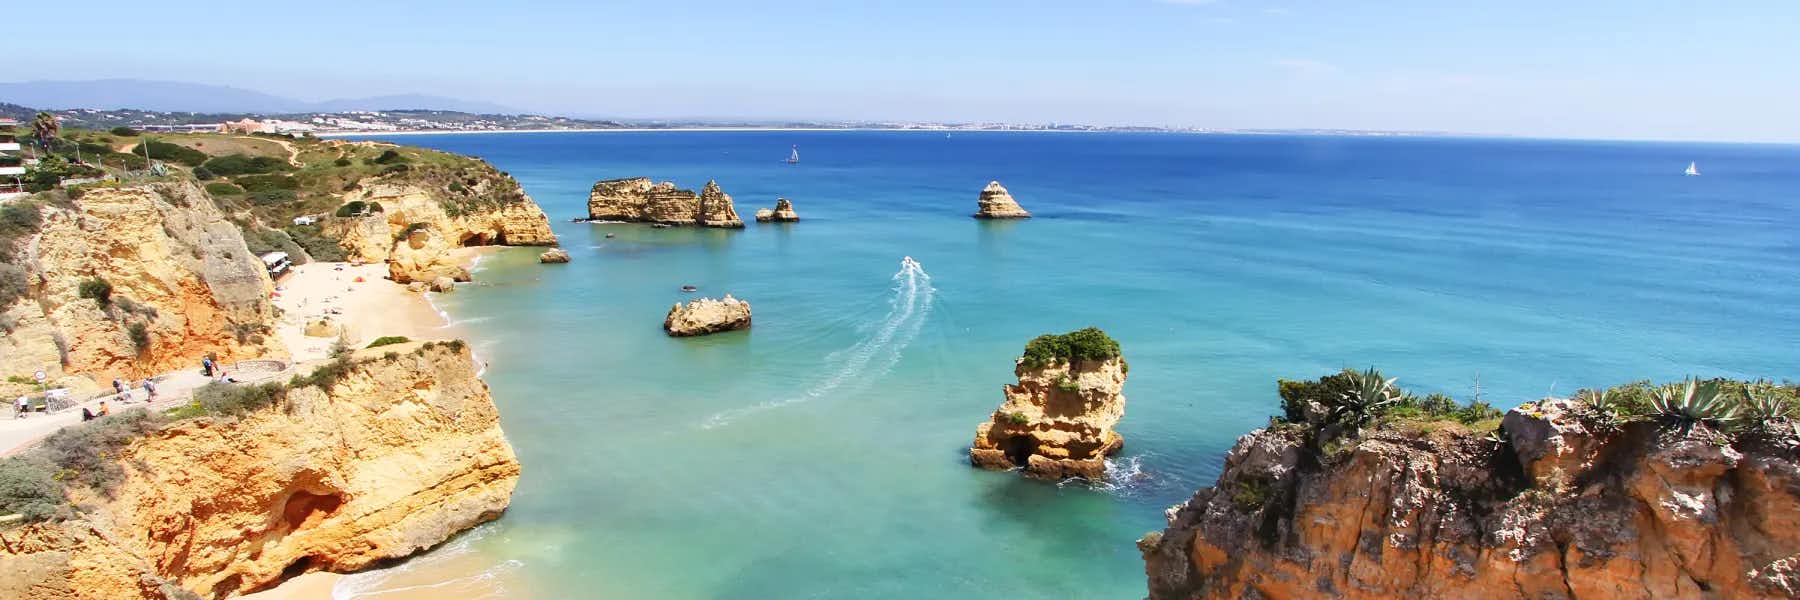 Seven Places to Retire in Portugal for Under $30,000 per Year